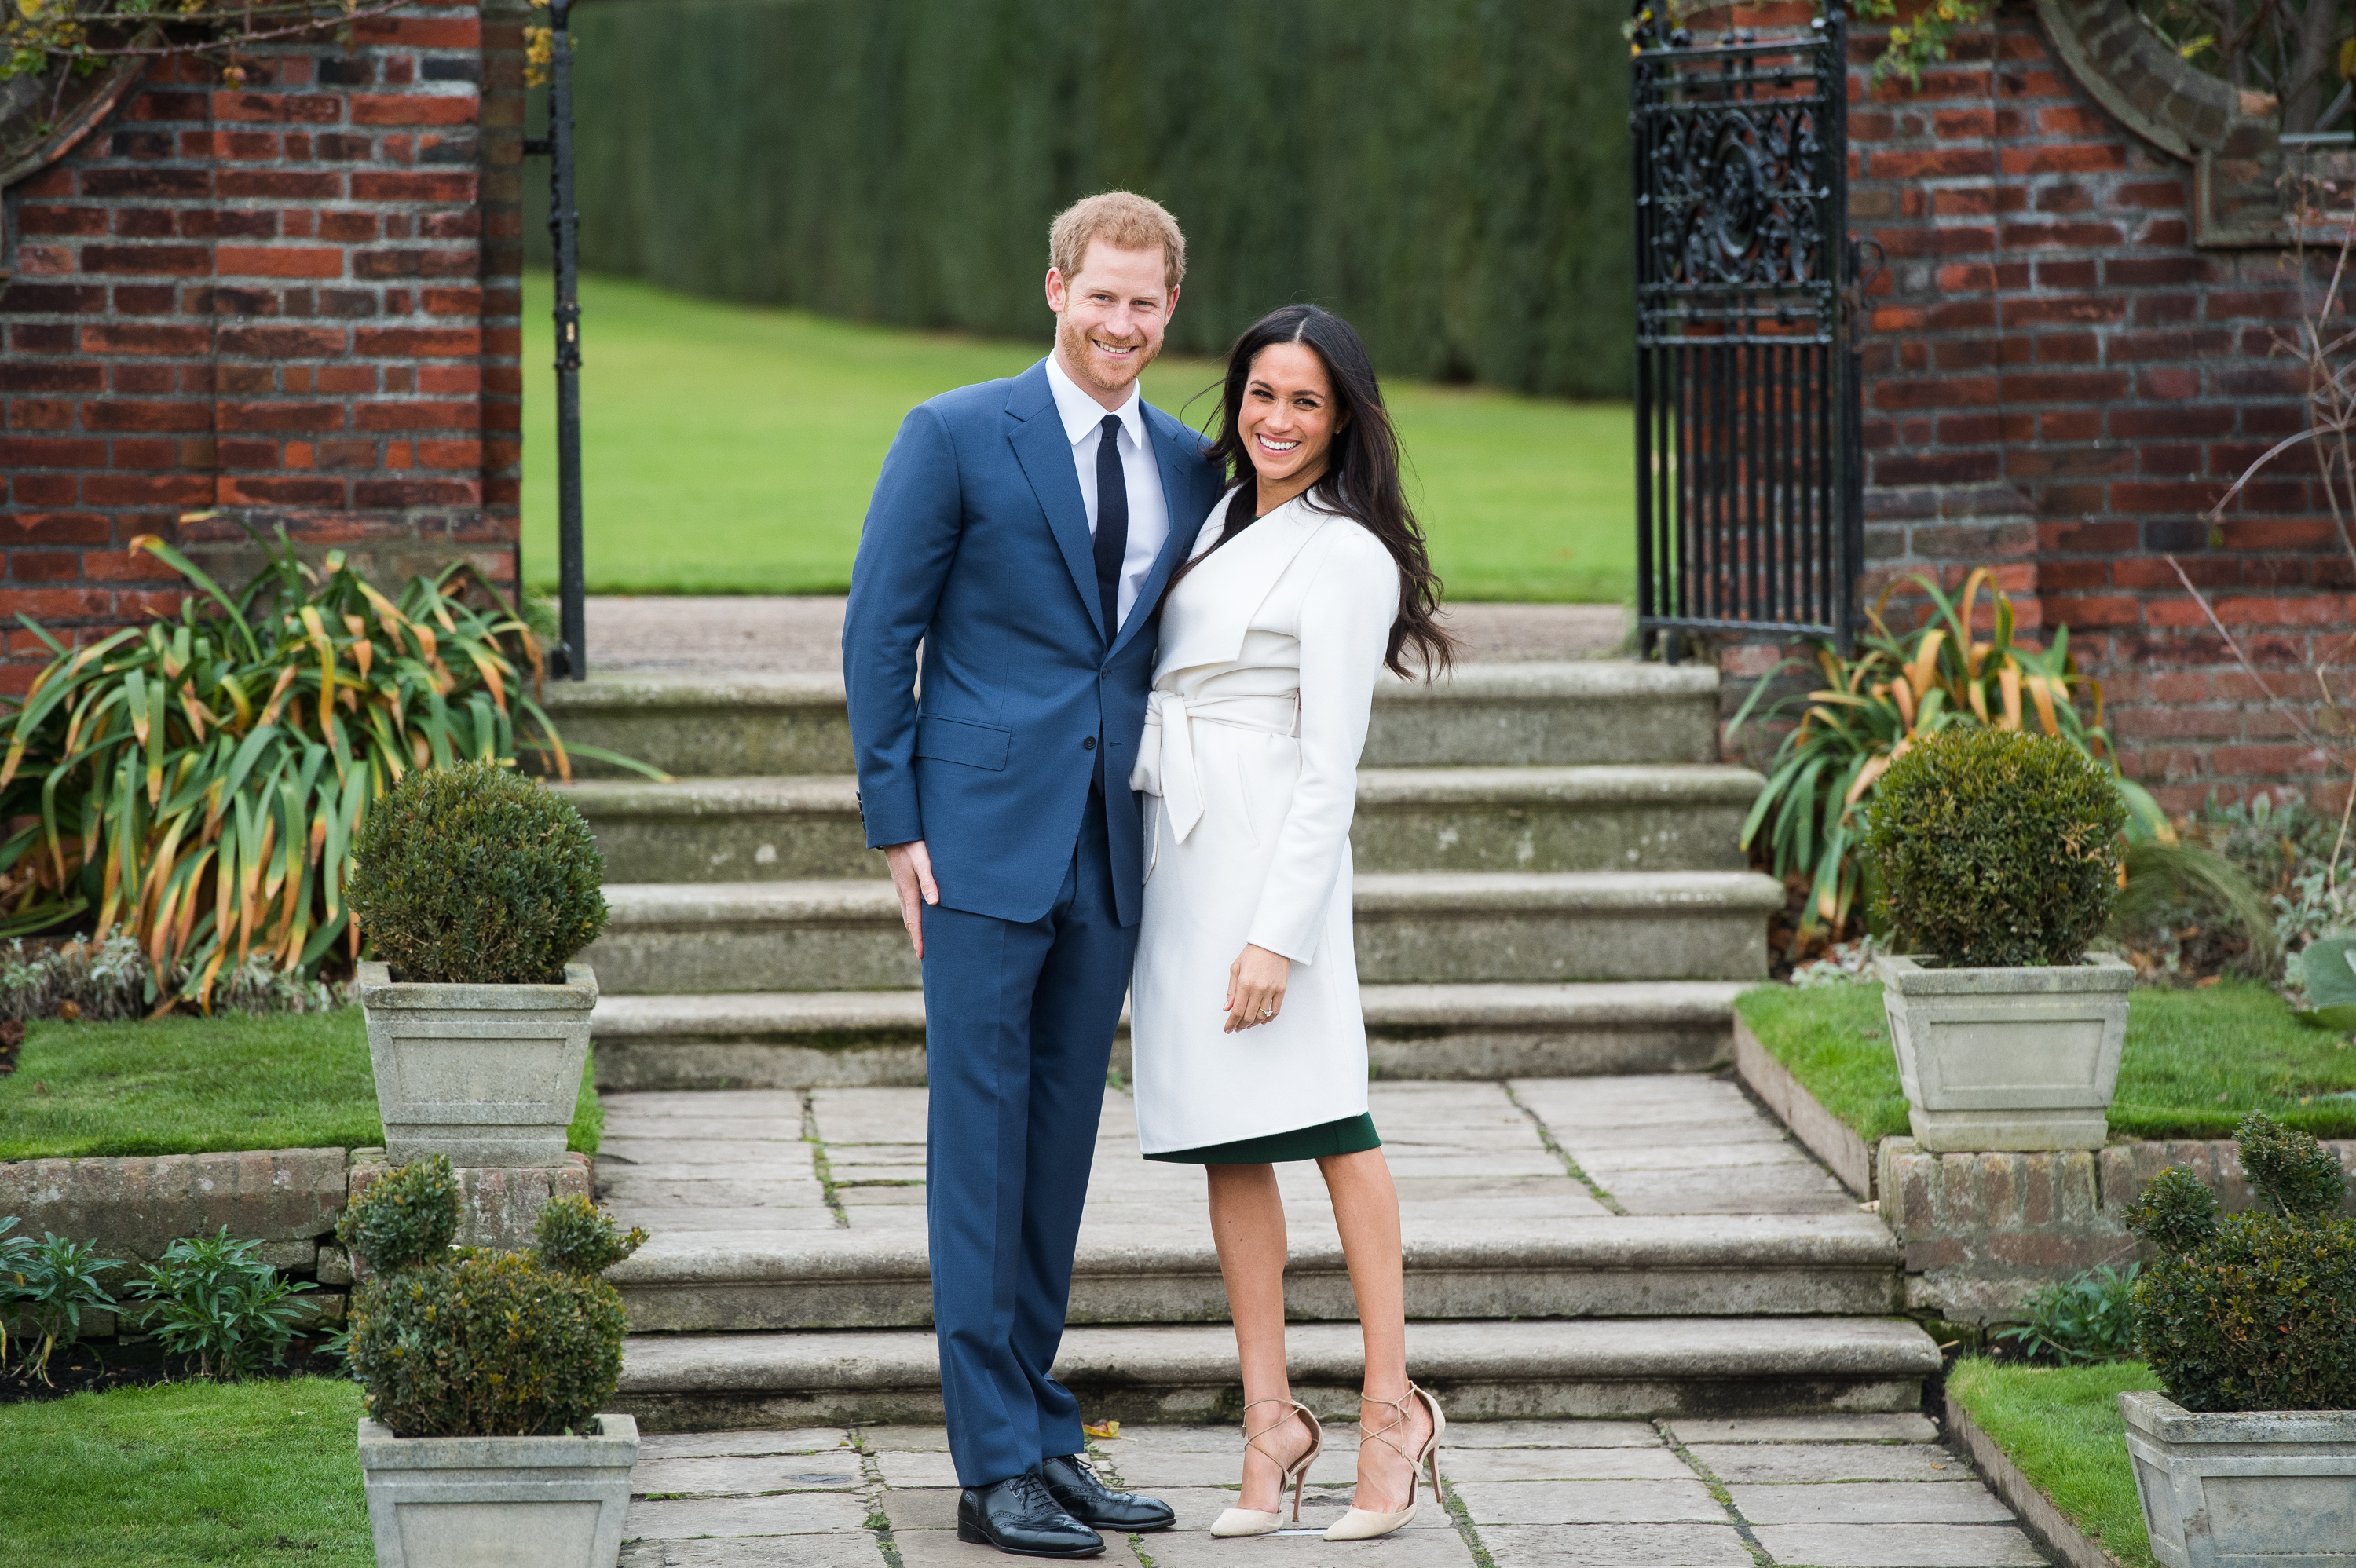 Prince Harry and Meghan Markle during an official photocall at The Sunken Gardens at Kensington Palace to announce their engagement on November 27, 2017. Samir Hussein—Samir Hussein/WireImage (Samir Hussein—Samir Hussein/WireImage)